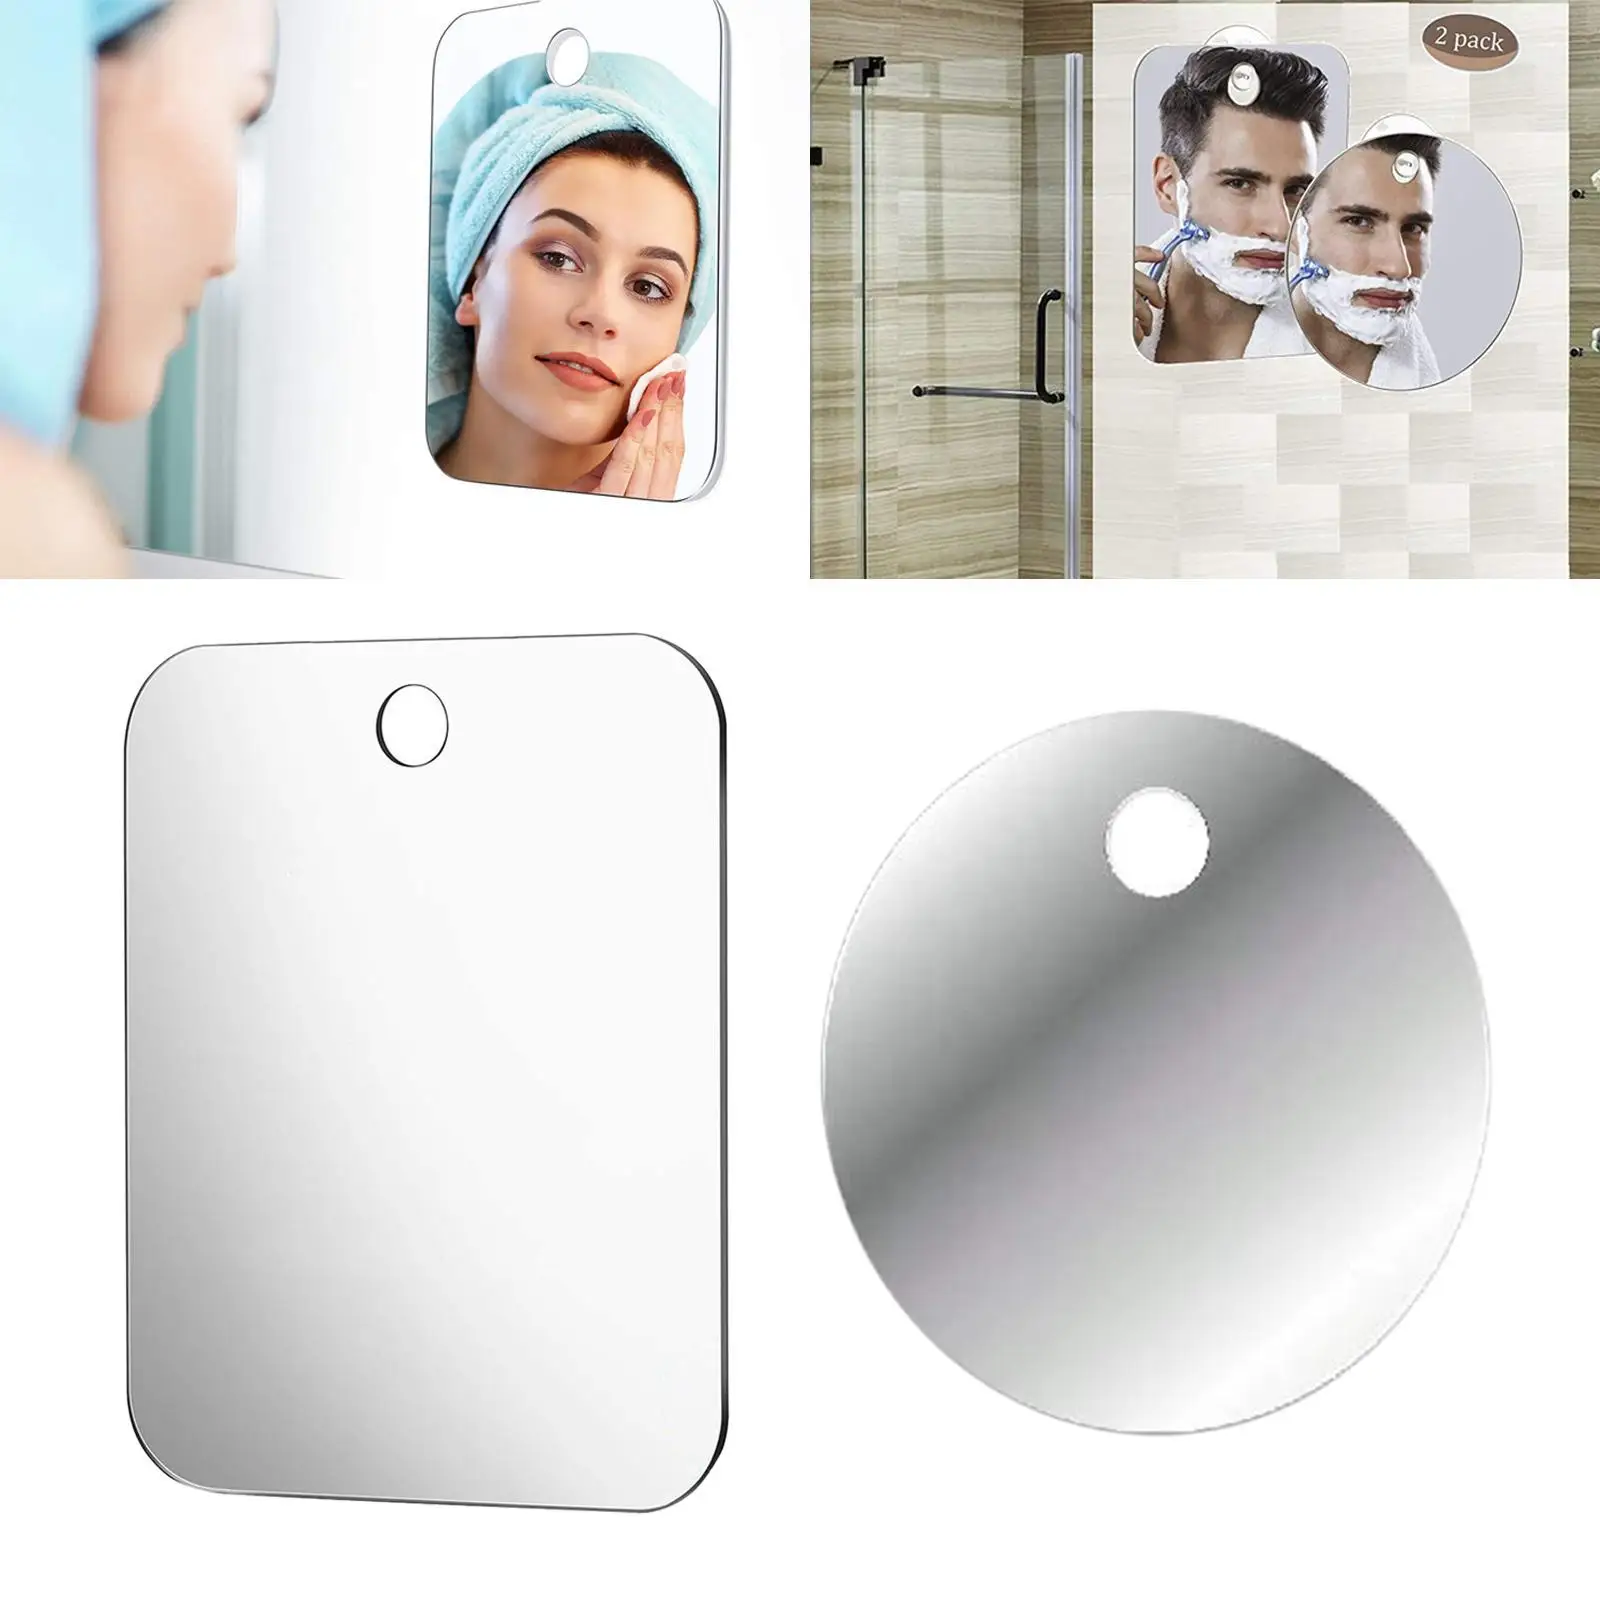  Shower Mirror, Anti Fog with Holder Bathroom Shaving Mirror, Fog- Wall Hanging Mirror for Bathroom Home Traveling